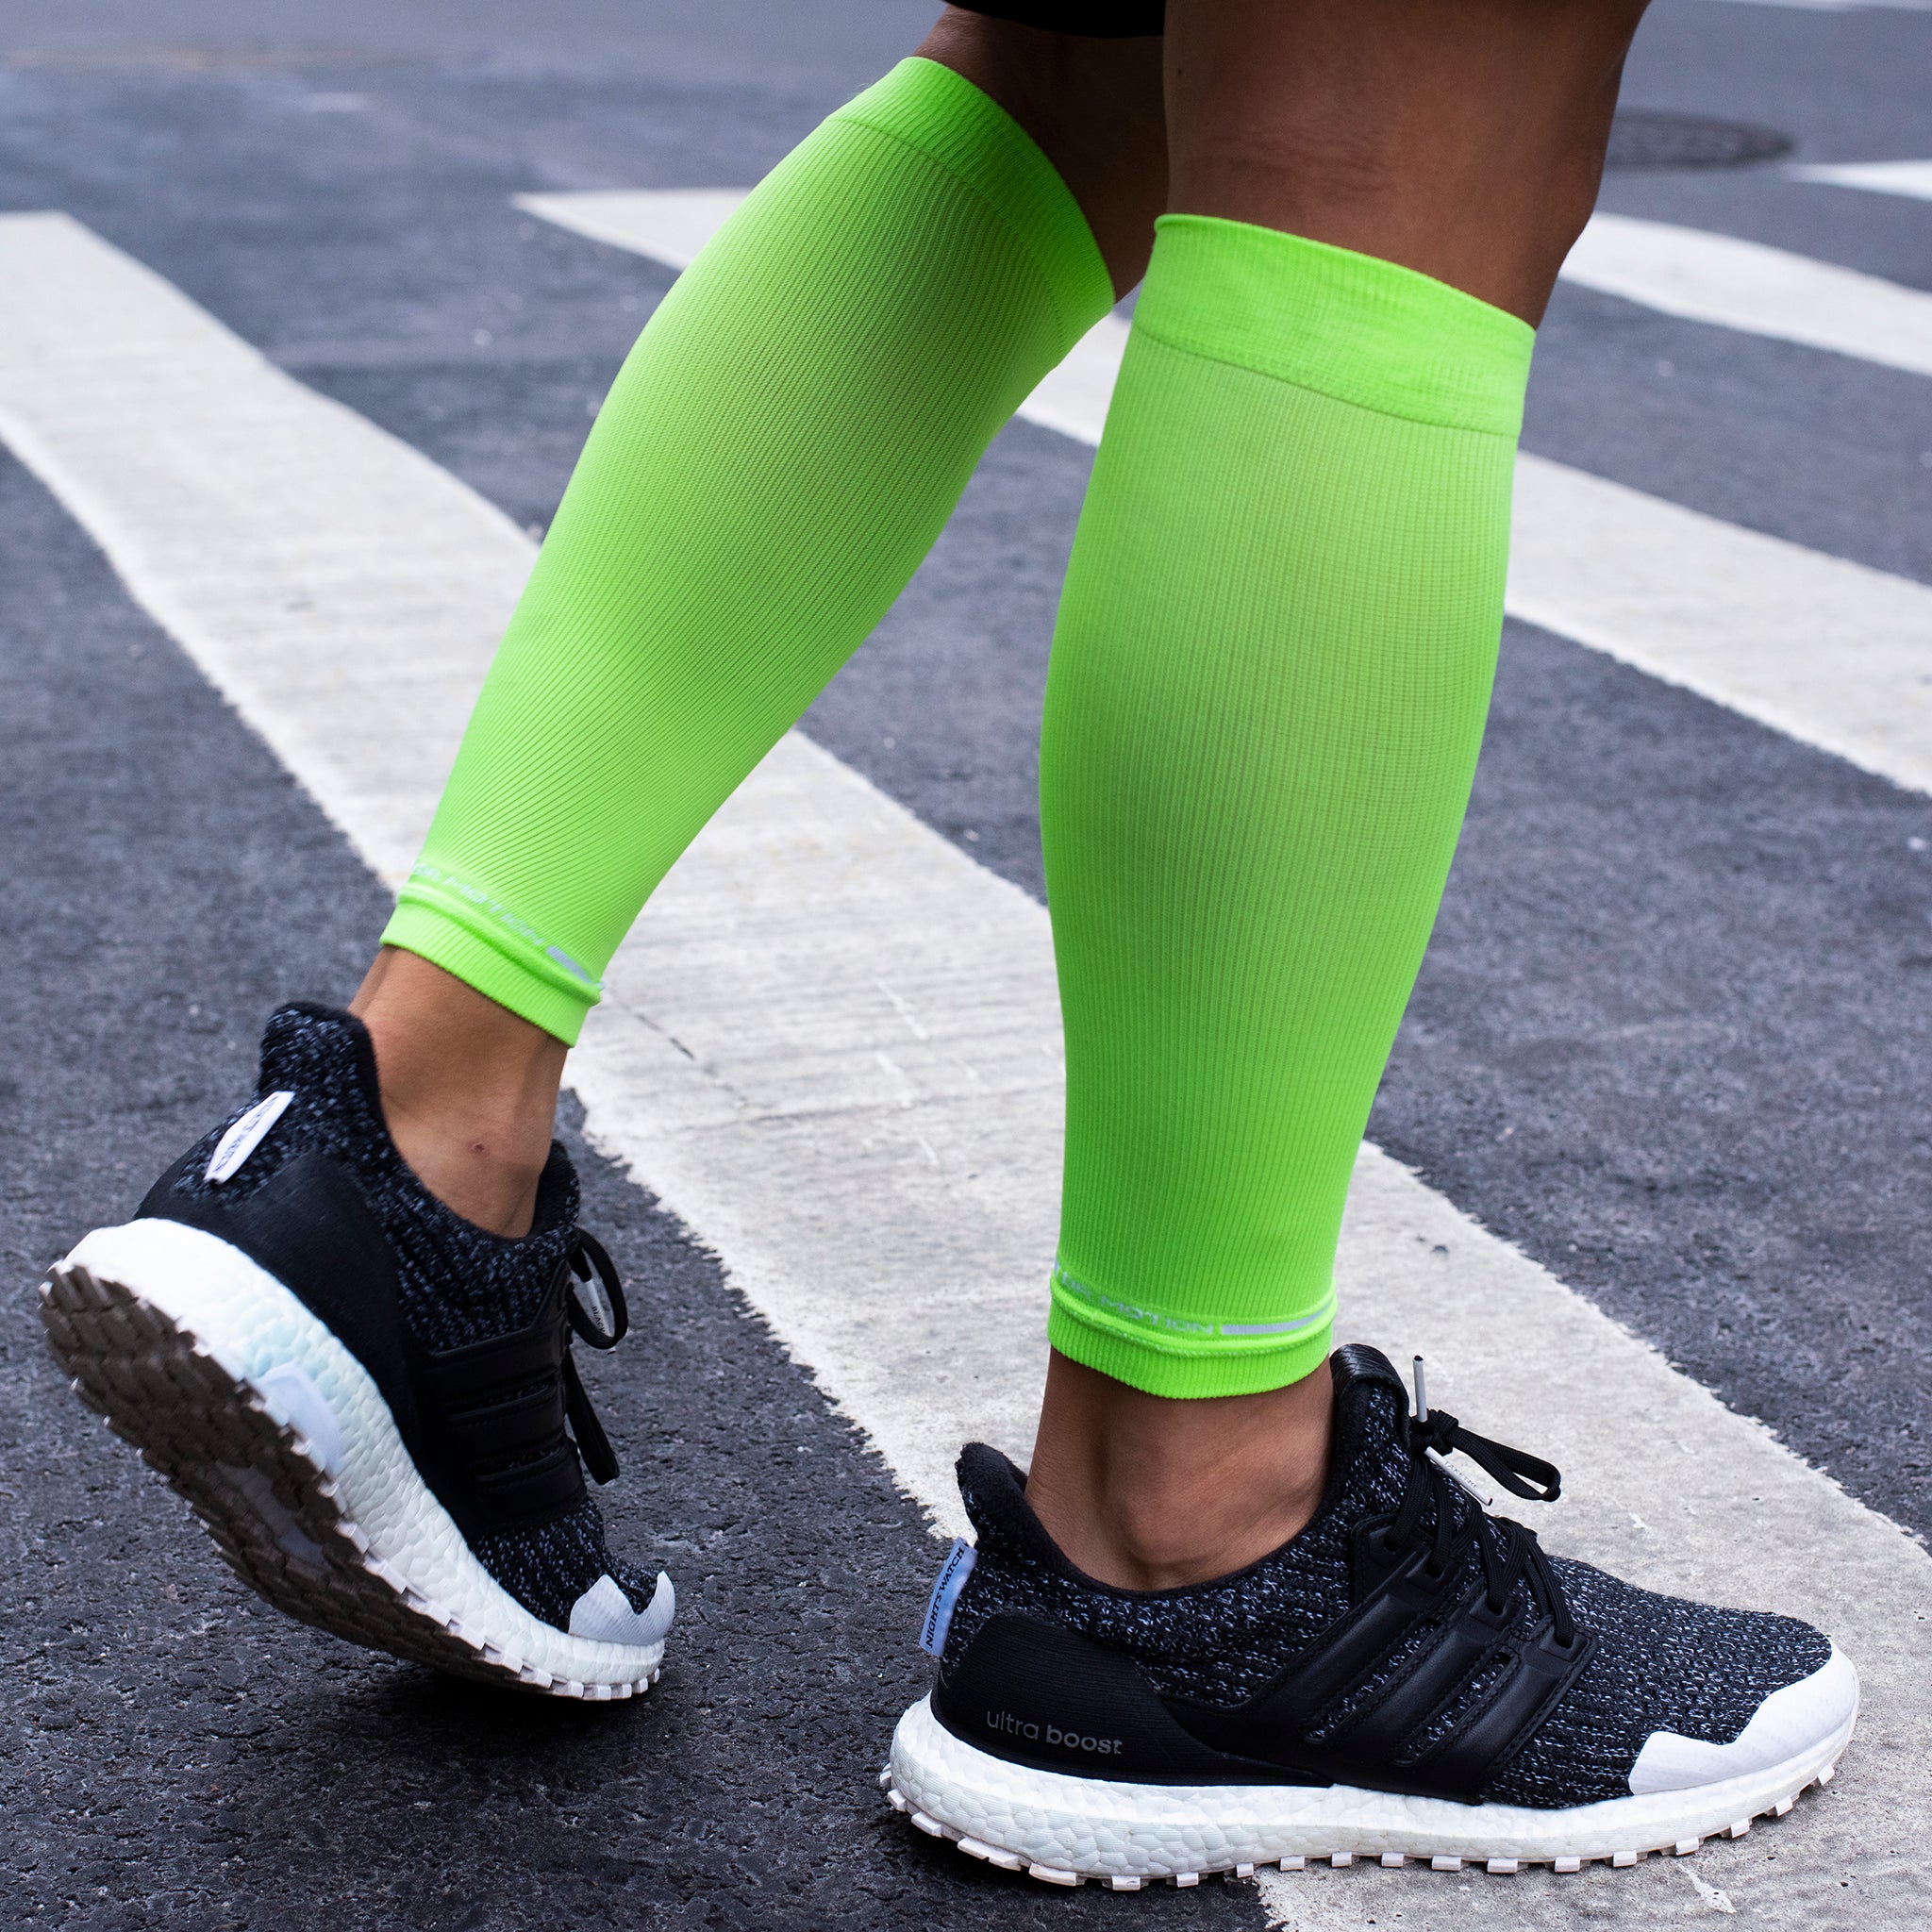 Calf Compression Sleeves: The Runner's Secret to Improved Performance —